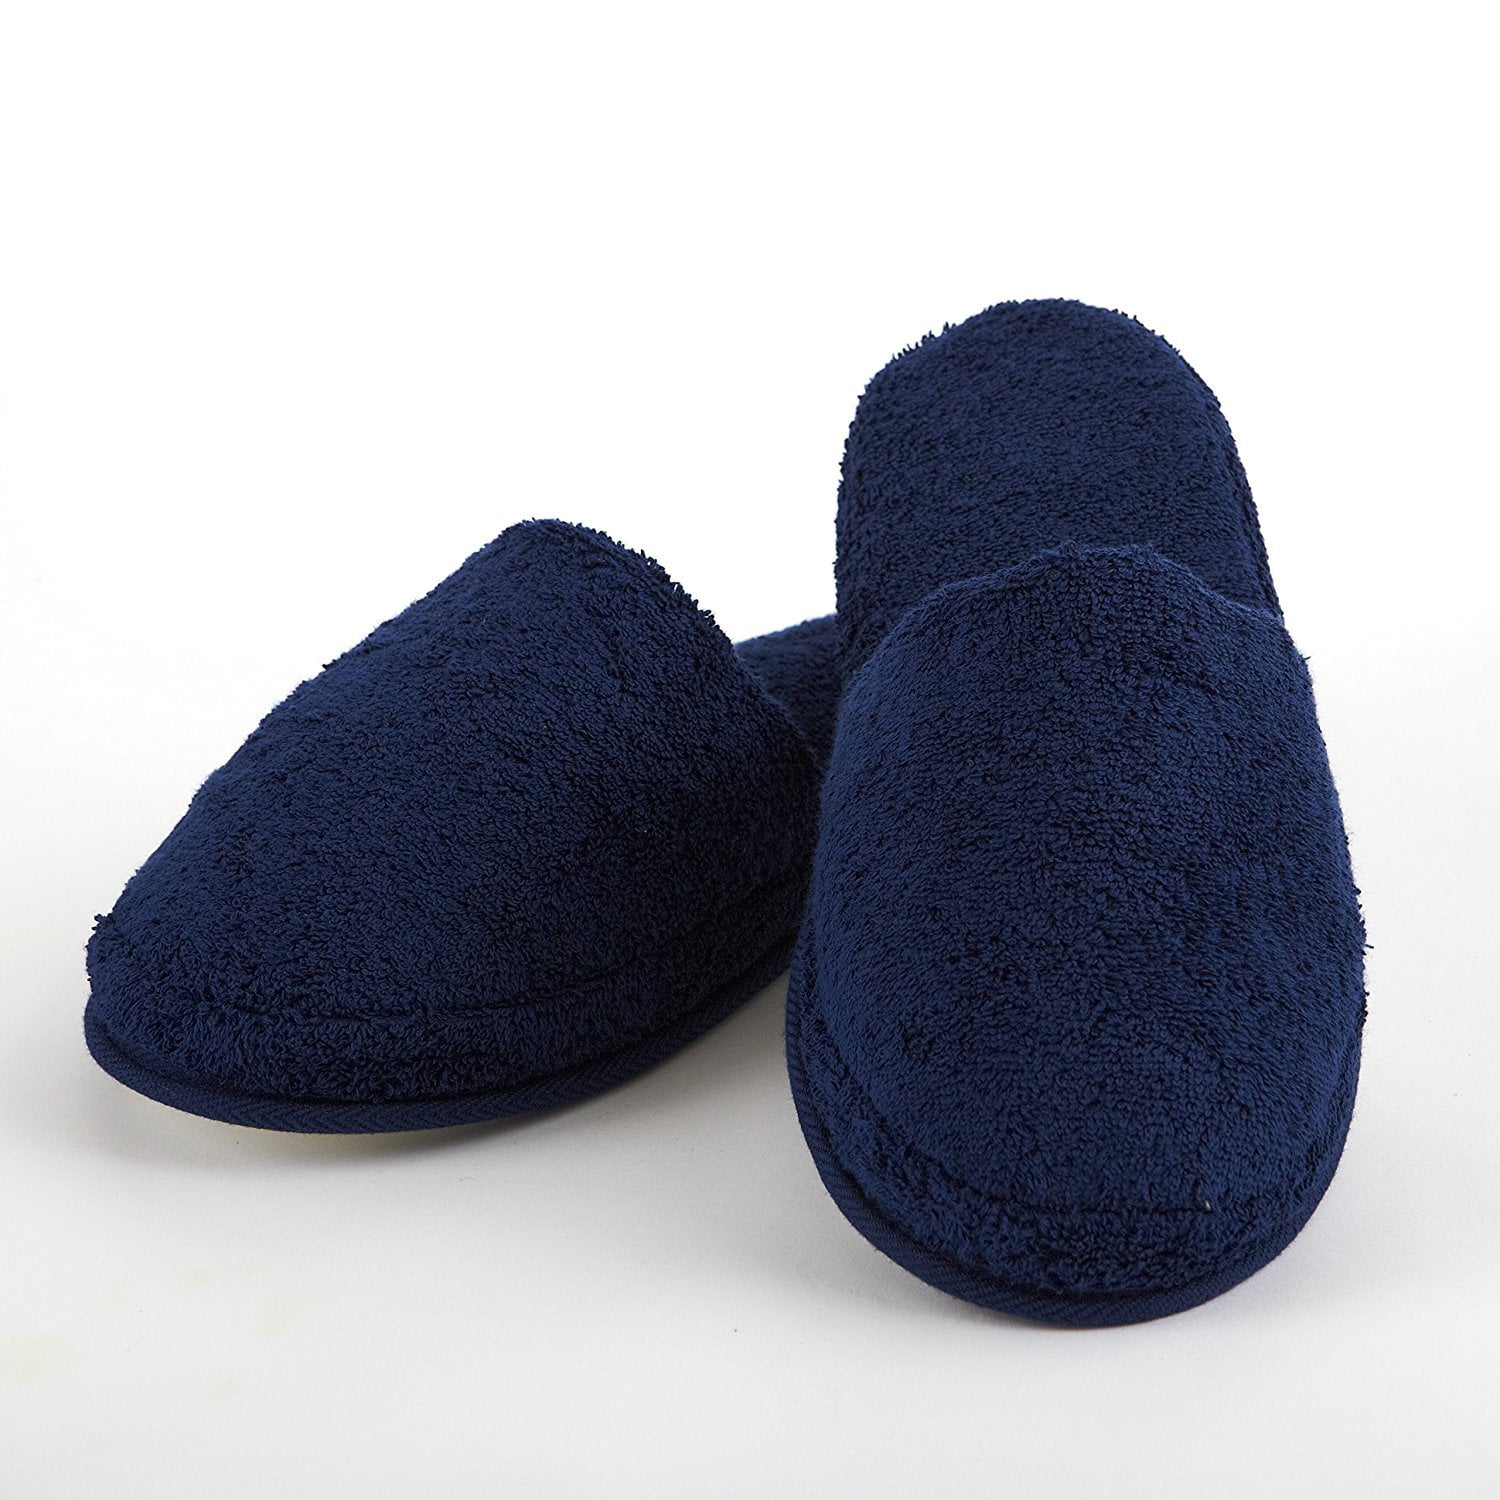 big and tall bedroom slippers